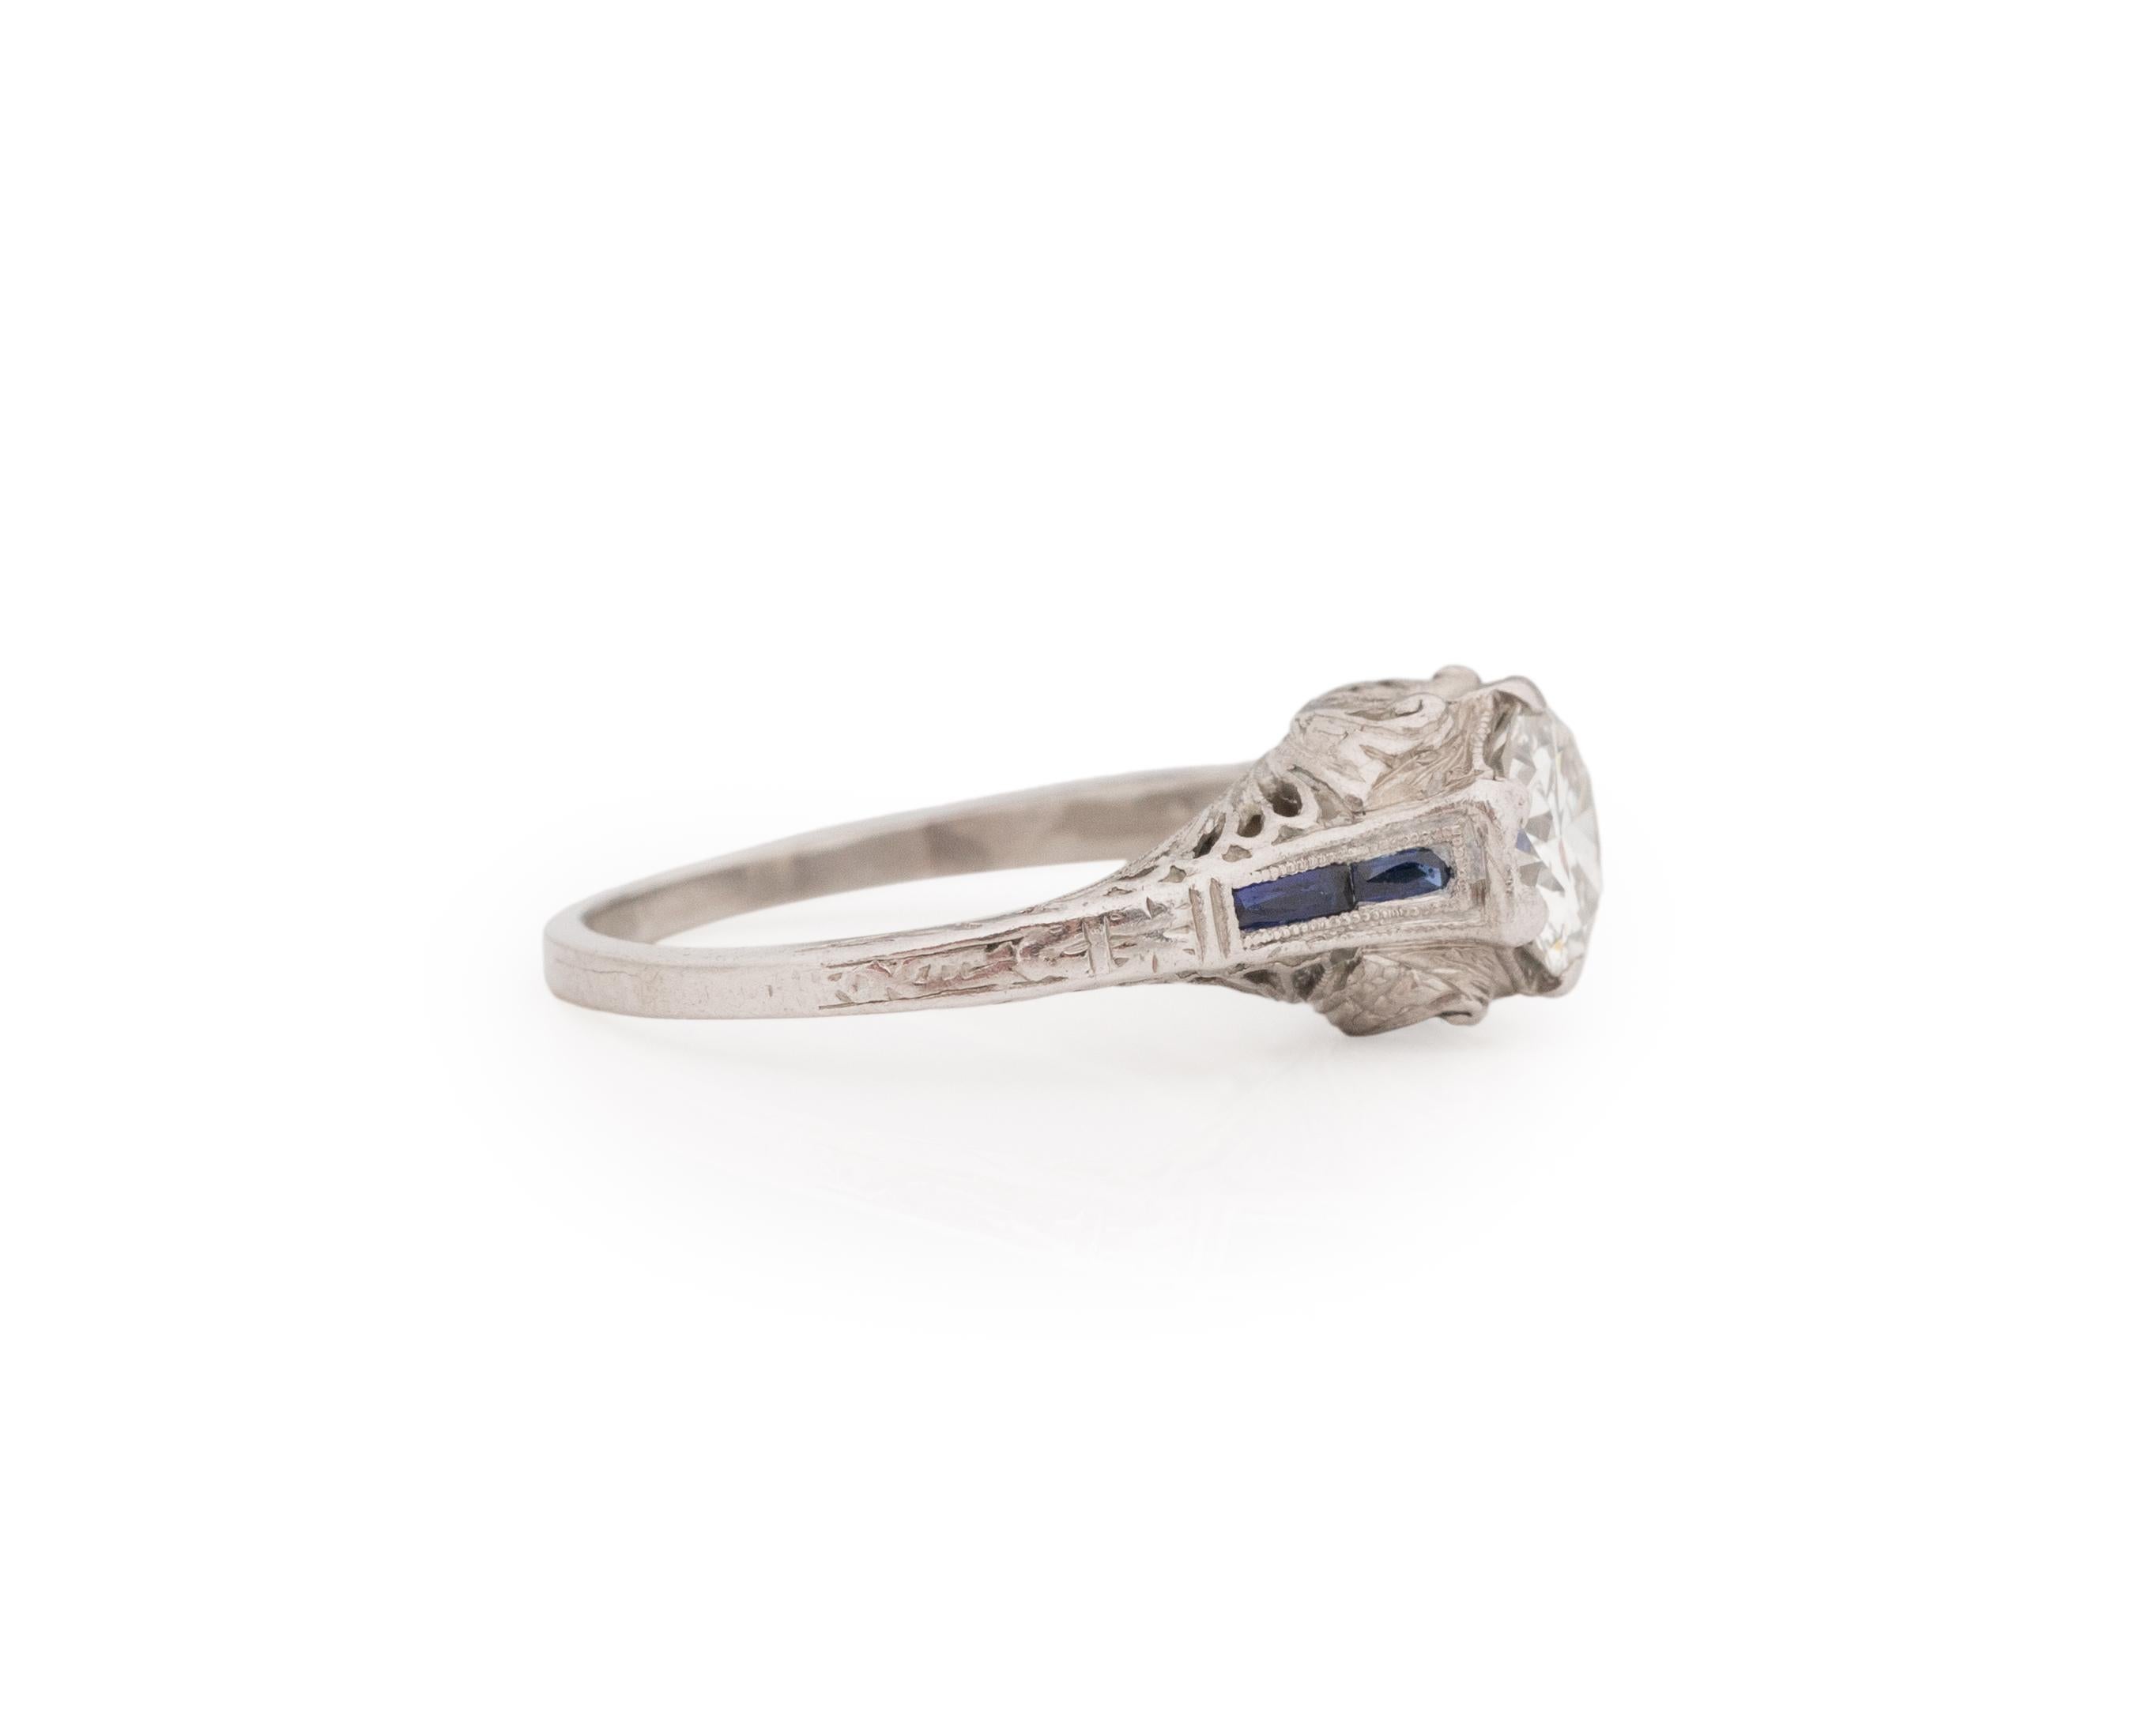 Ring Size: 5.25
Metal Type: Platinum [Hallmarked, and Tested]
Weight: 3.32 grams

Center Diamond Details:
Weight: .90ct
Cut: Transitional Old European
Color: J
Clarity: VS1

Finger to Top of Stone Measurement: 6mm
Condition: Excellent